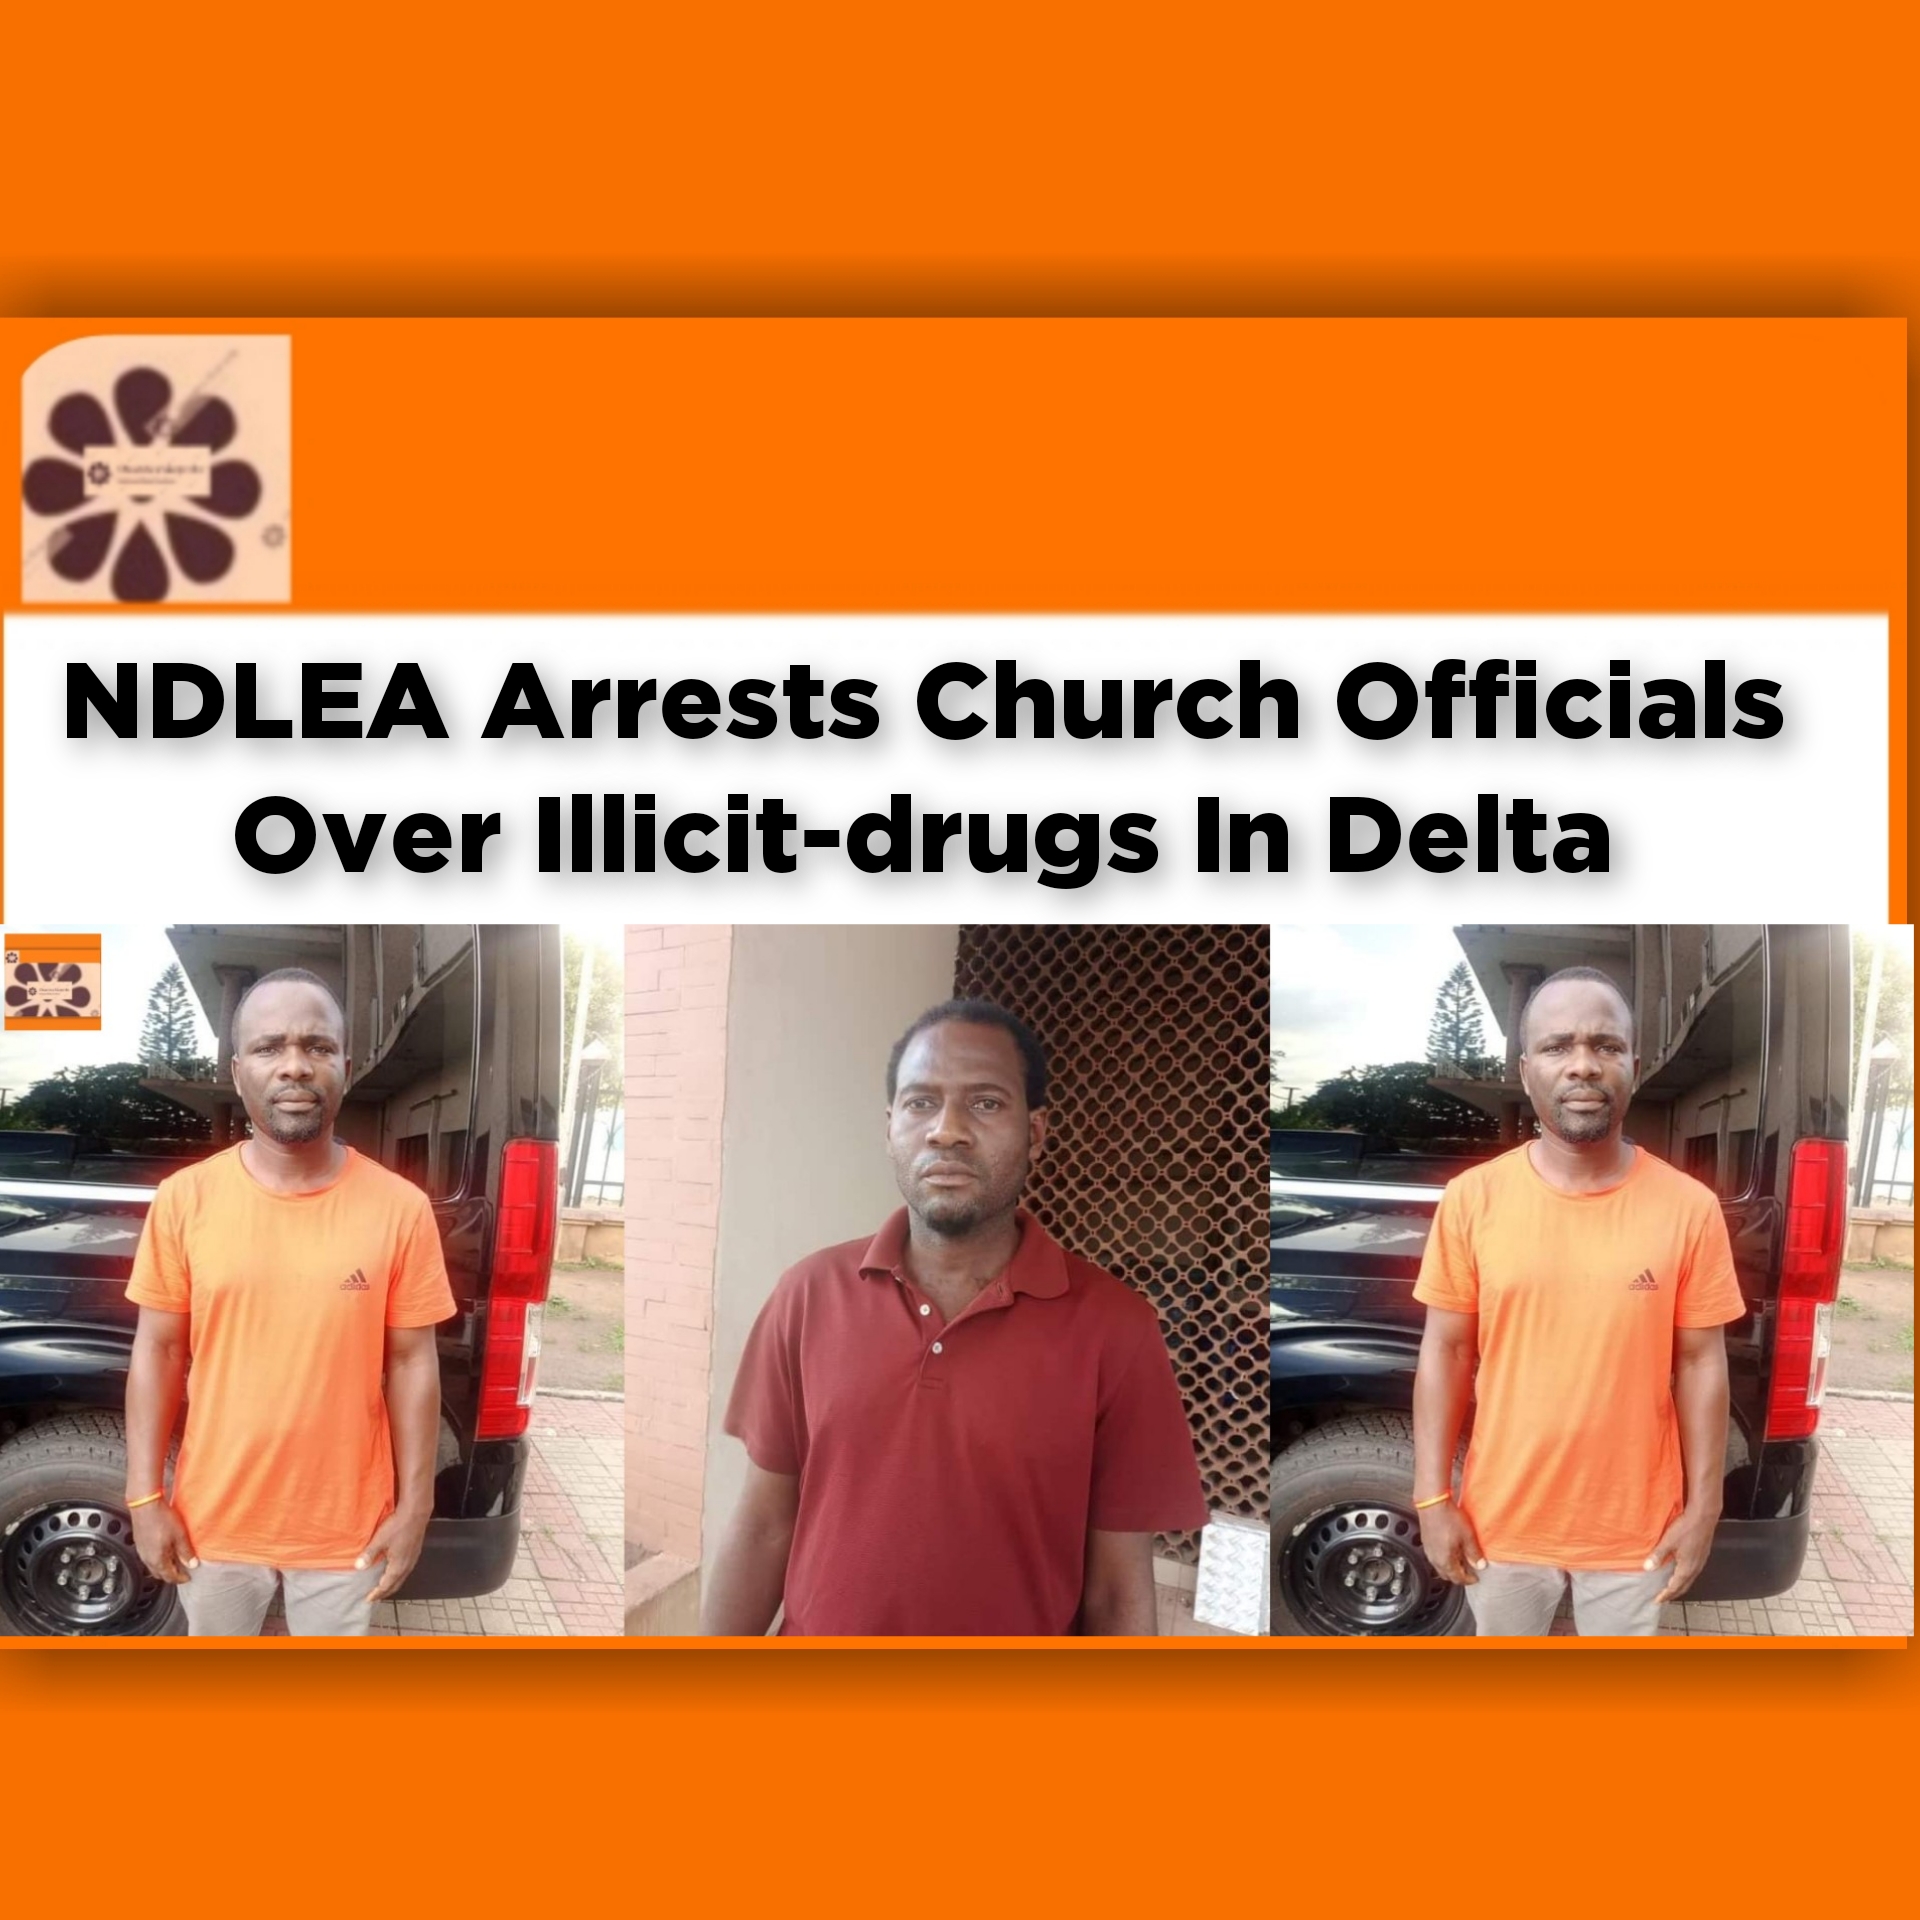 NDLEA Arrests Church Officials Over Illicit-drugs In Delta